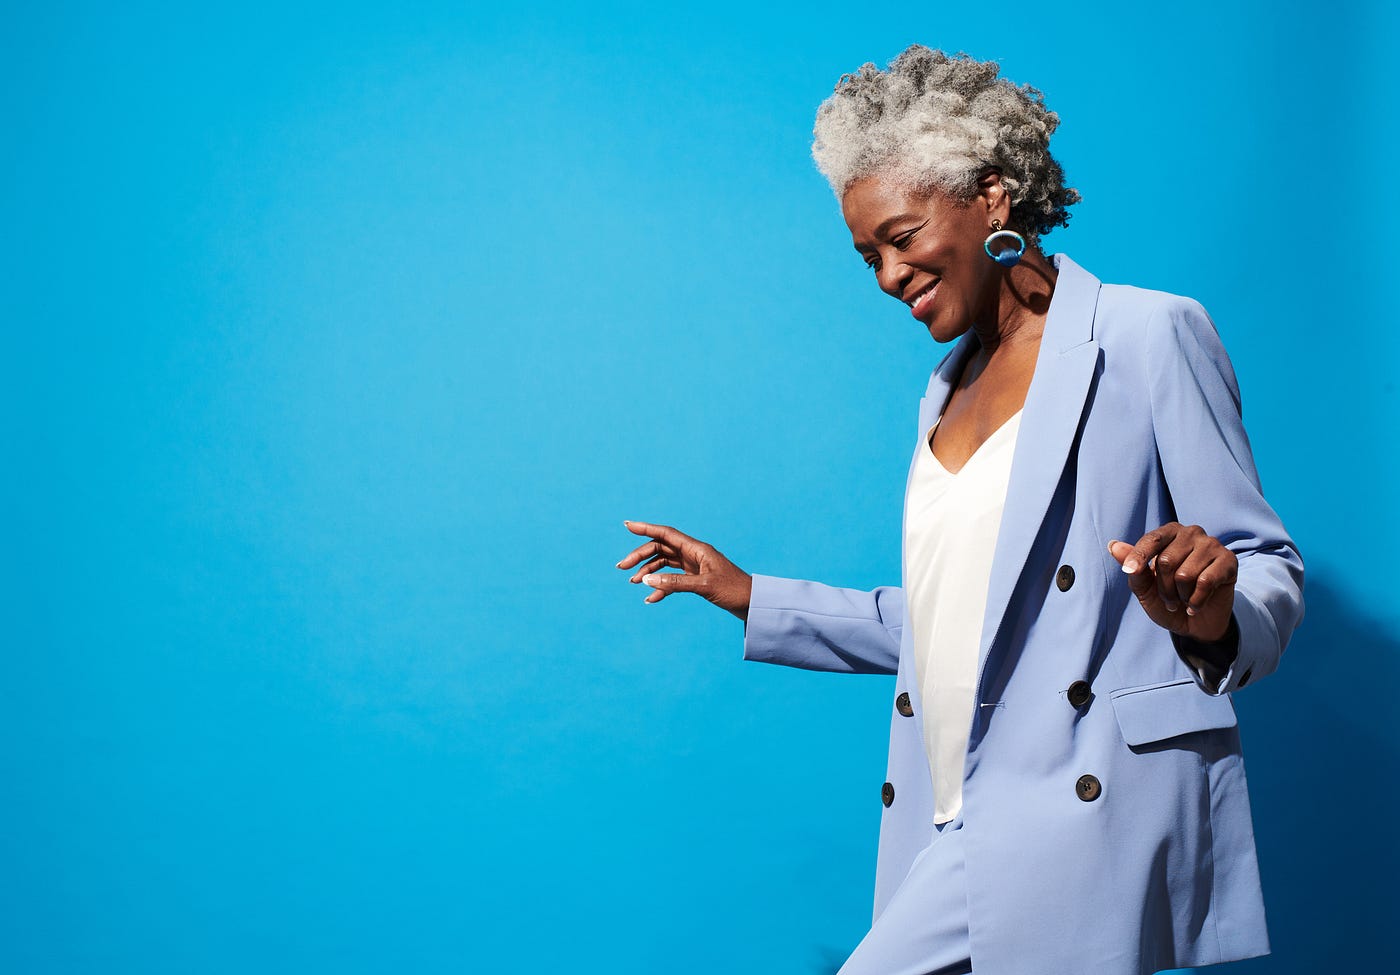 Confident, smiling older Black woman in a powder blue suit against a sky blue background.